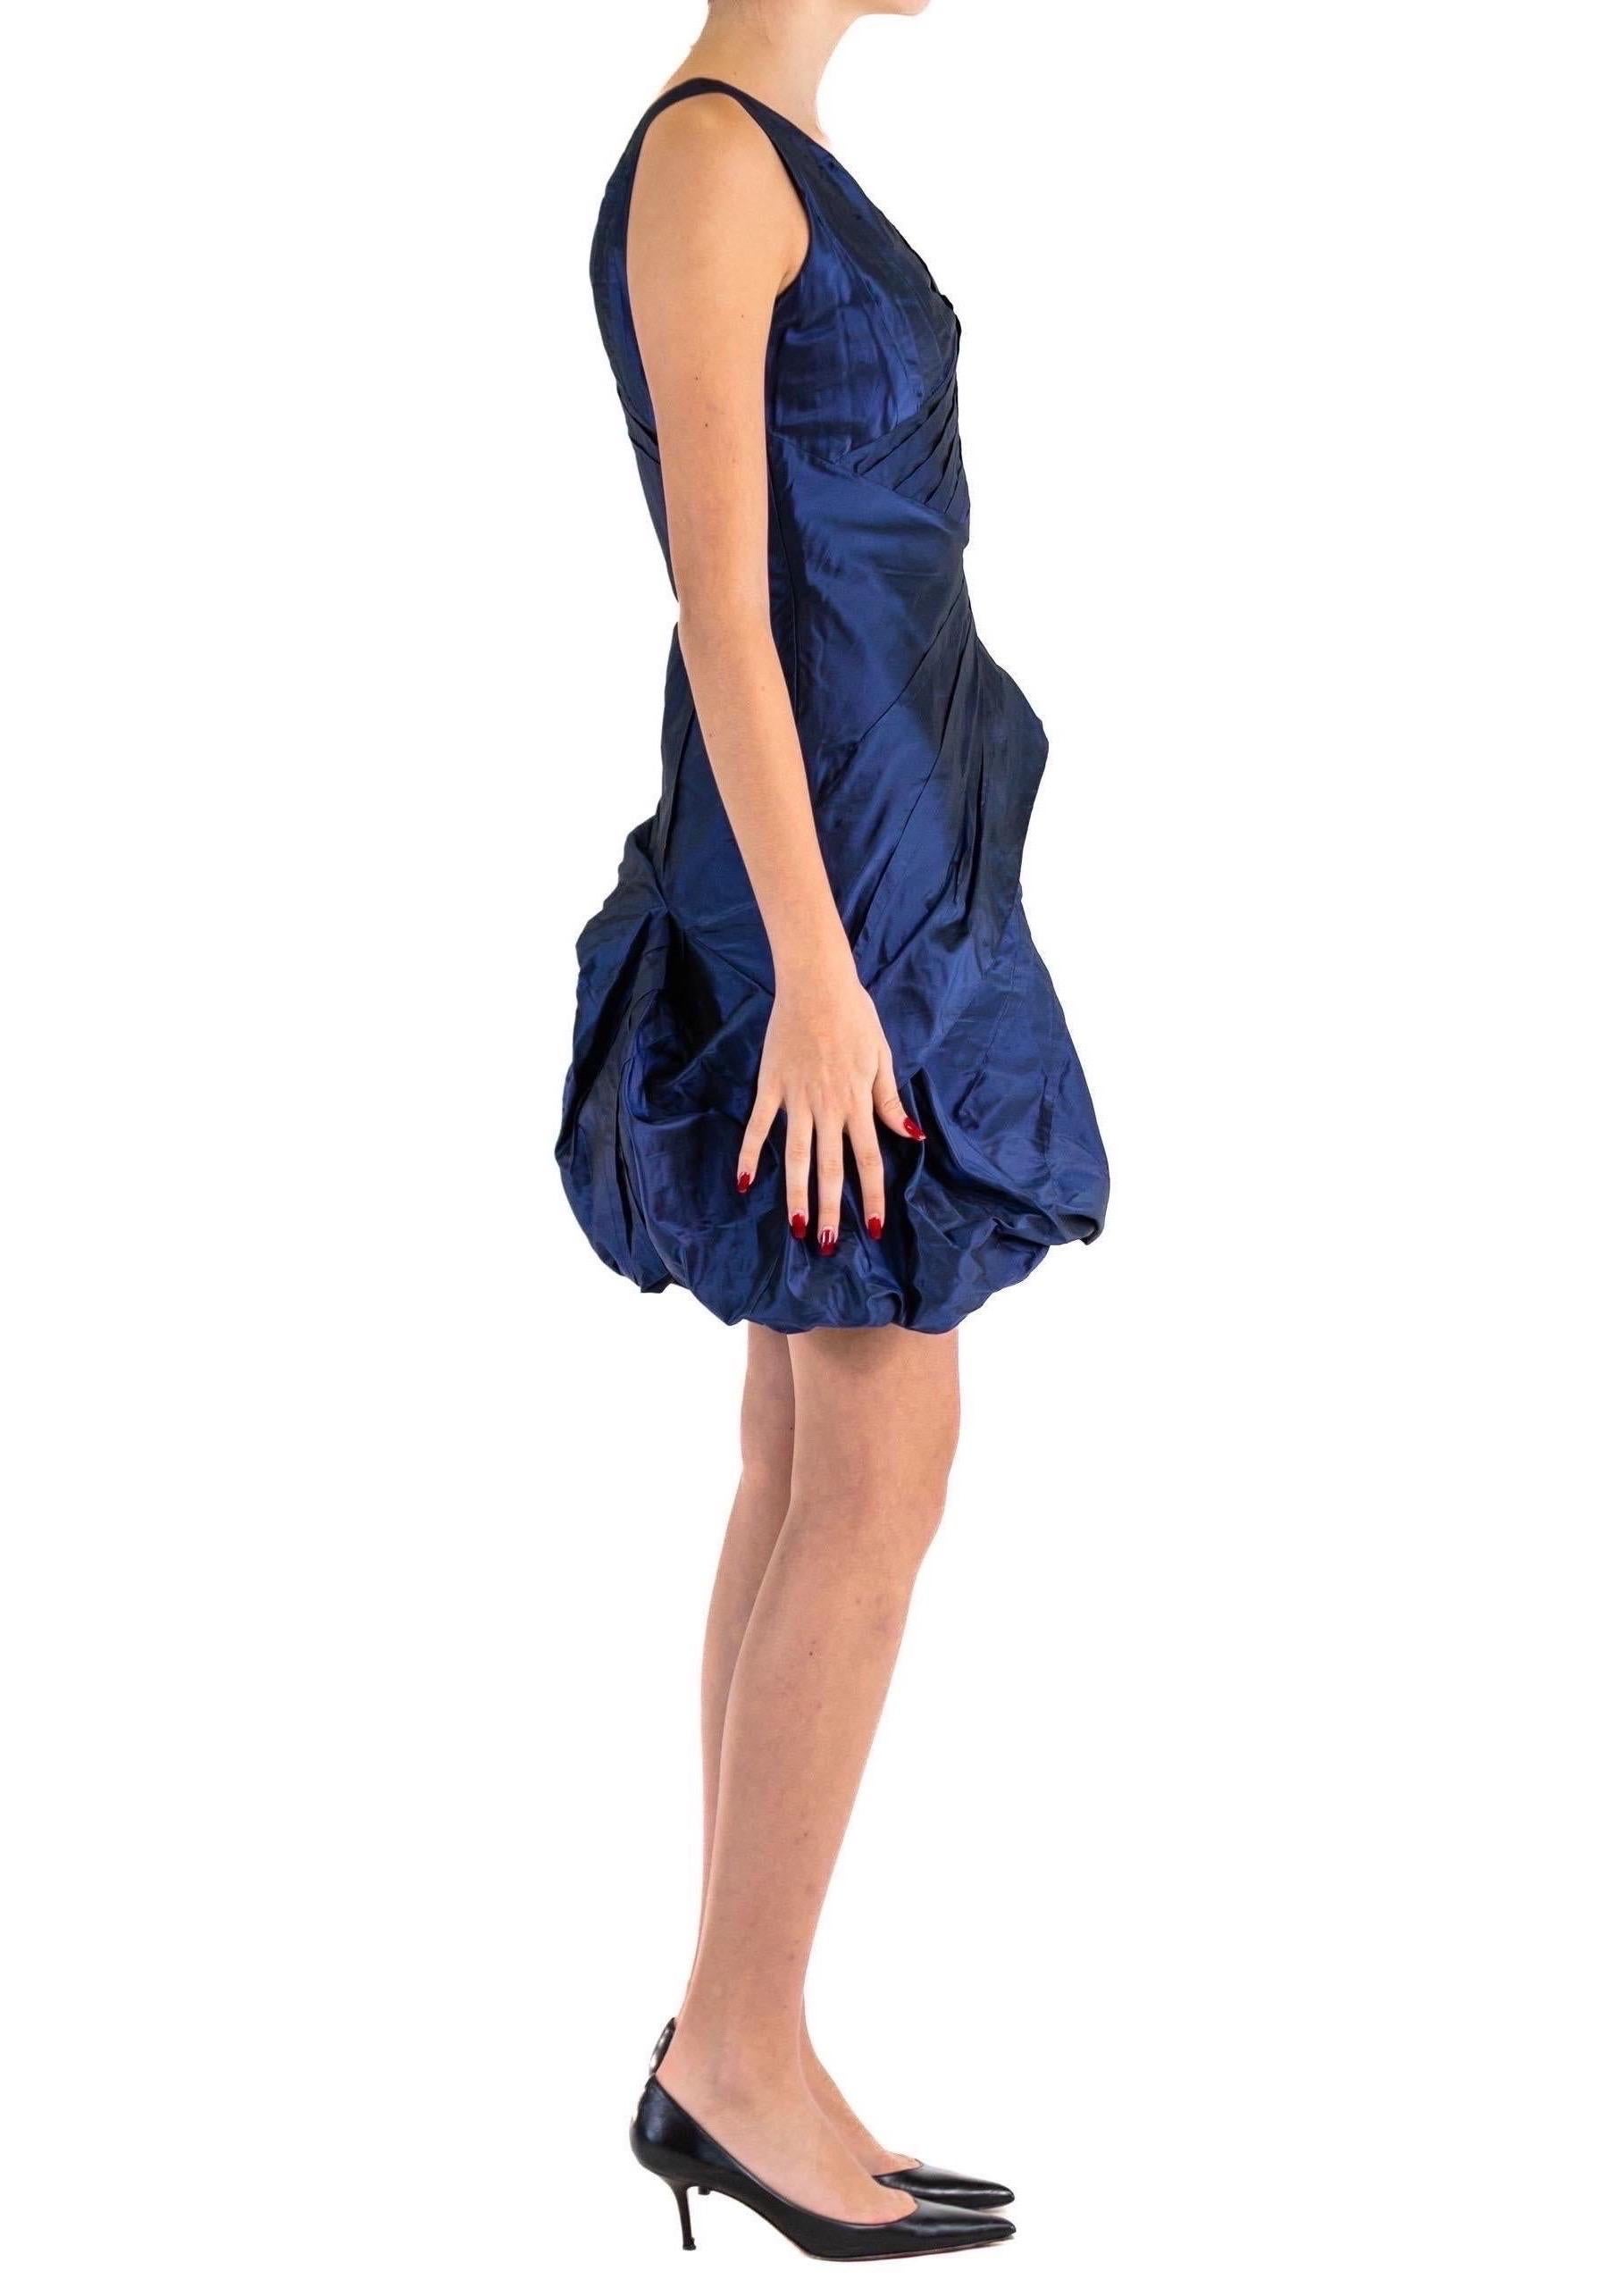 2000S JOHN GALLIANO CHRISTIAN DIOR Blue Silk Taffeta Ruched & Draped Cocktail D In Excellent Condition For Sale In New York, NY